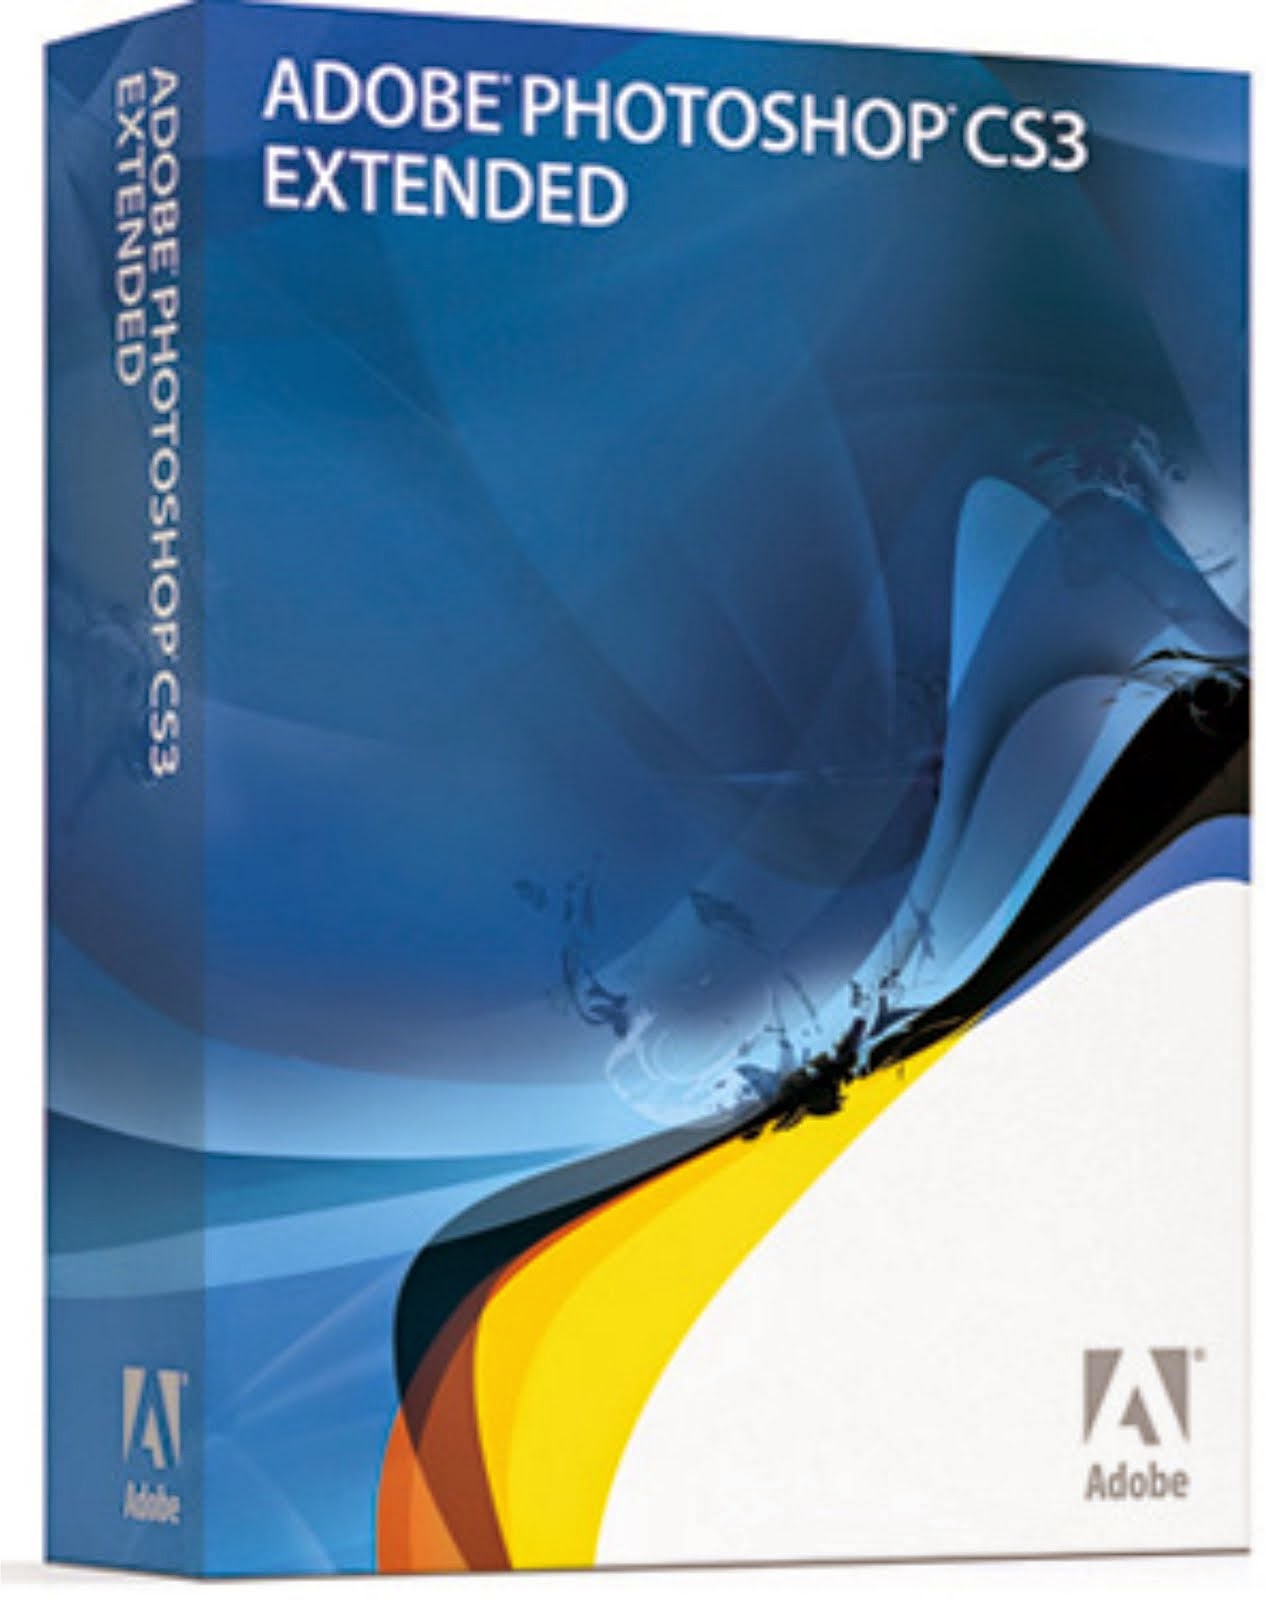 adobe photoshop cs9 free download full version with crack